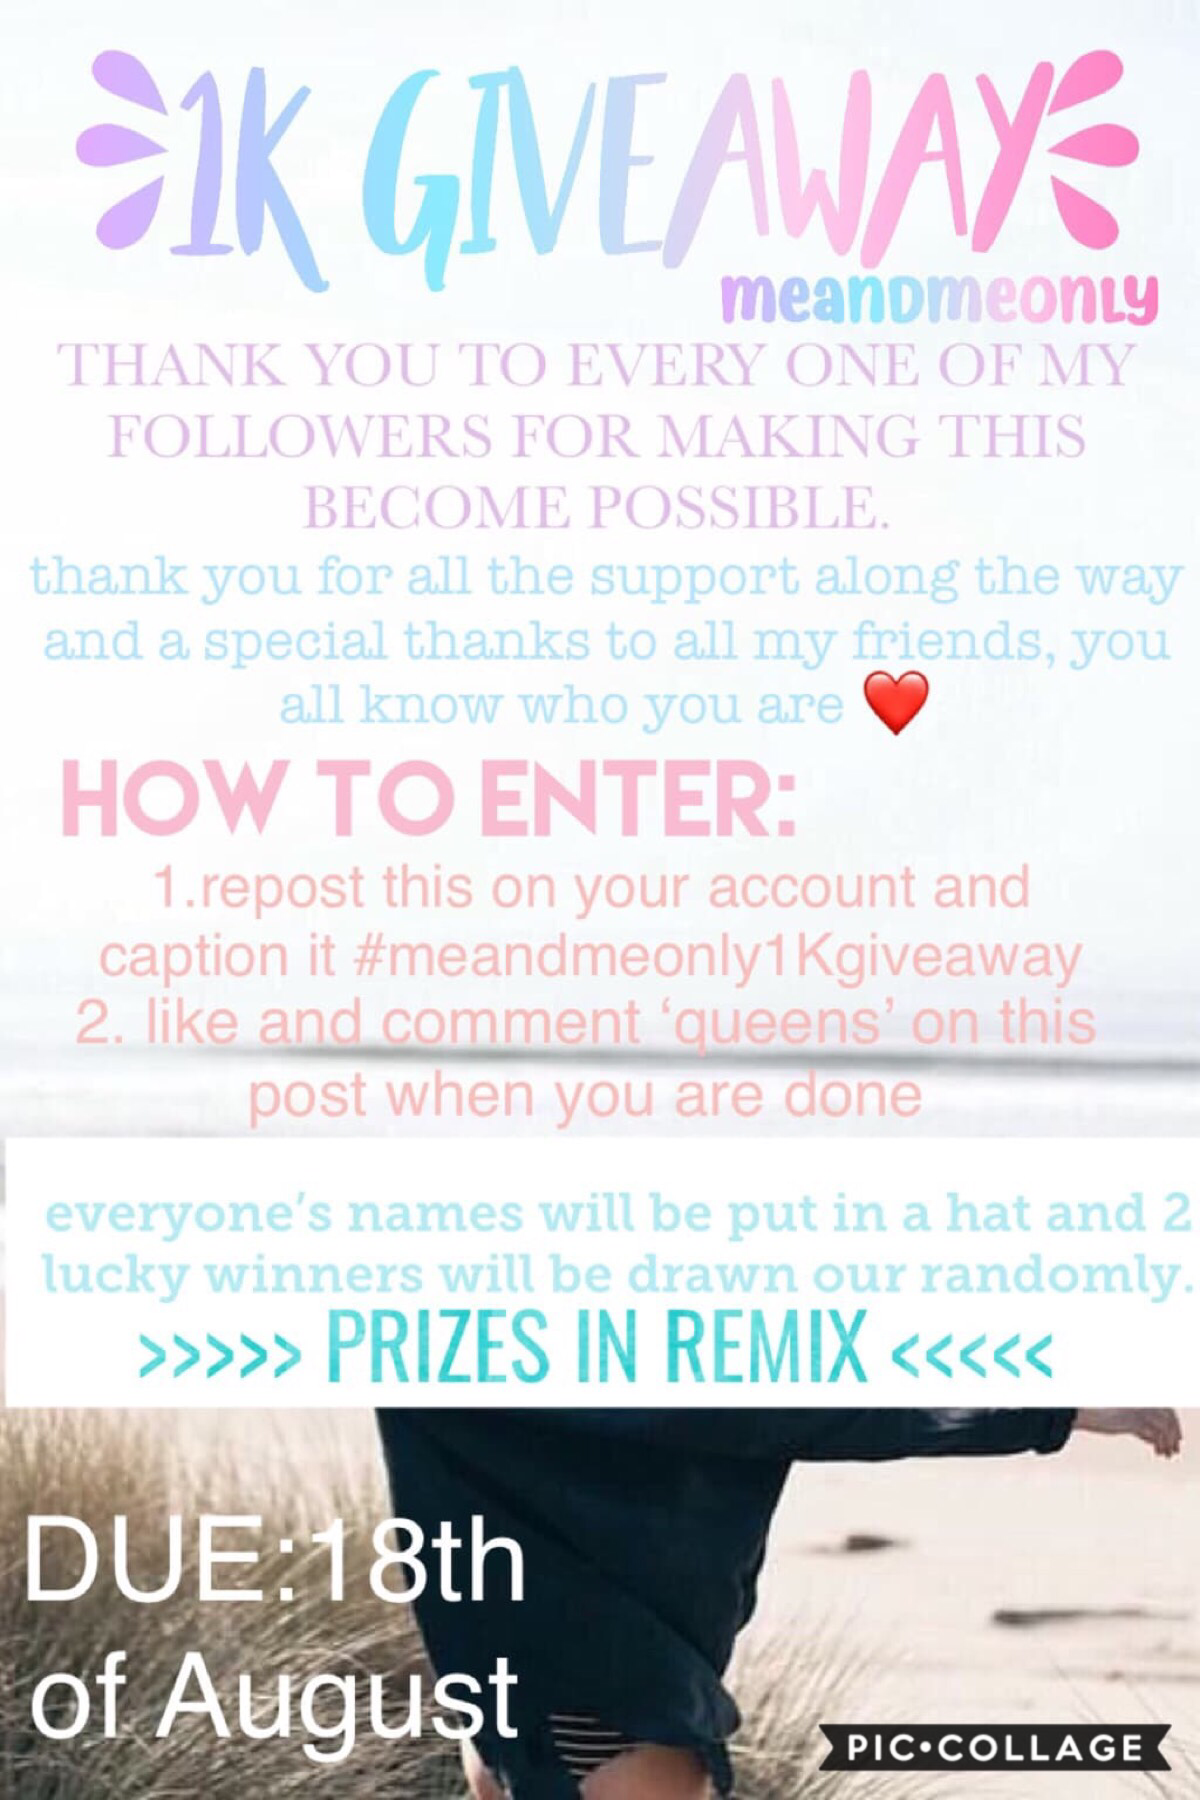 #meandmeonly1Kgiveaway 💛